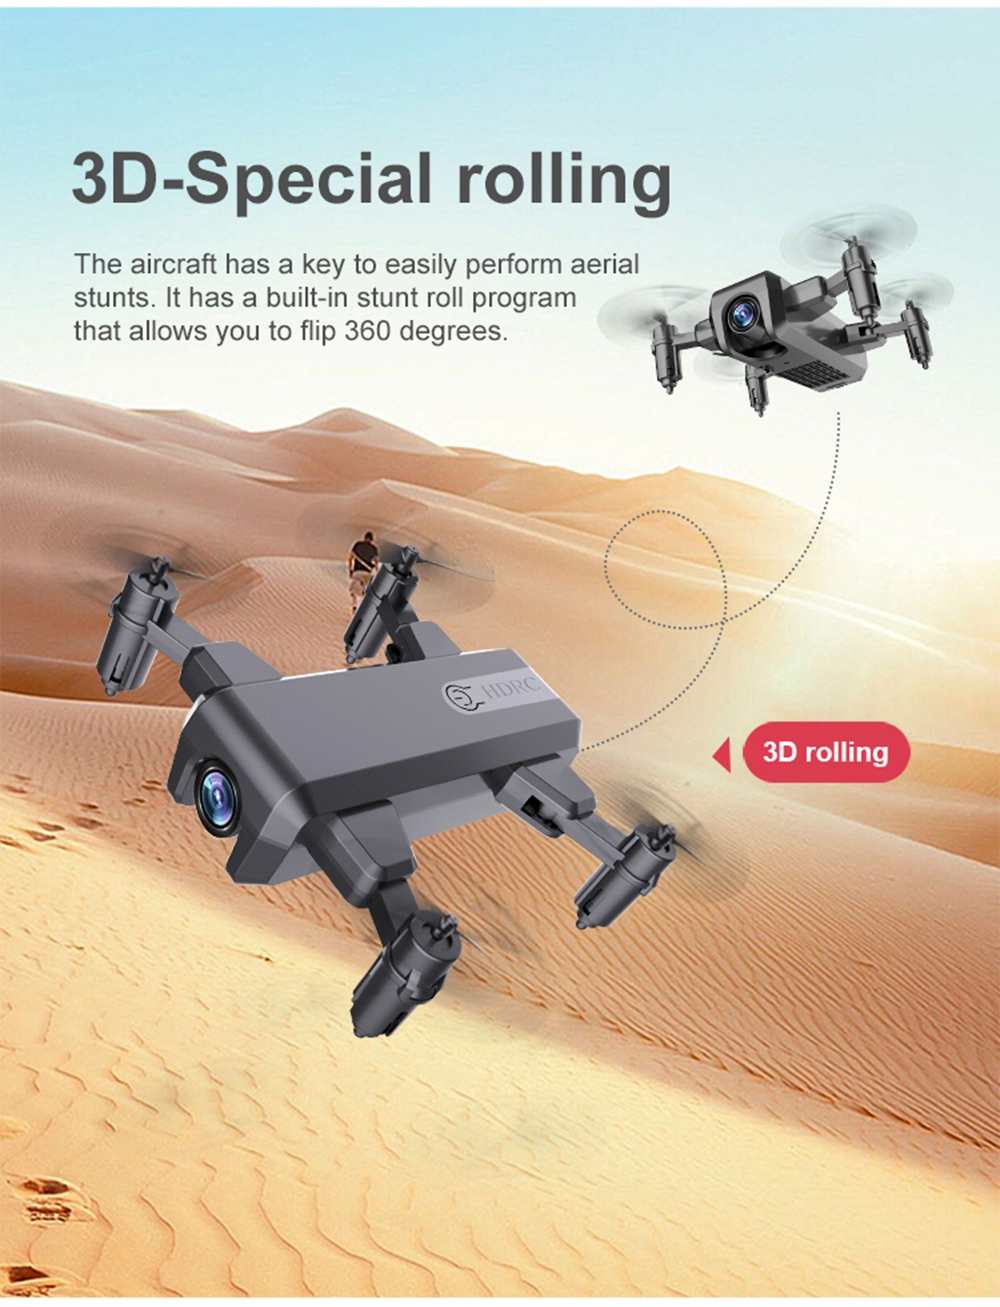 RC Helicopter H2 Mini Drone 4k HD Camera WIFI FPV Professional Foldable Quadcopter Aerial Photography RC Dron Toys